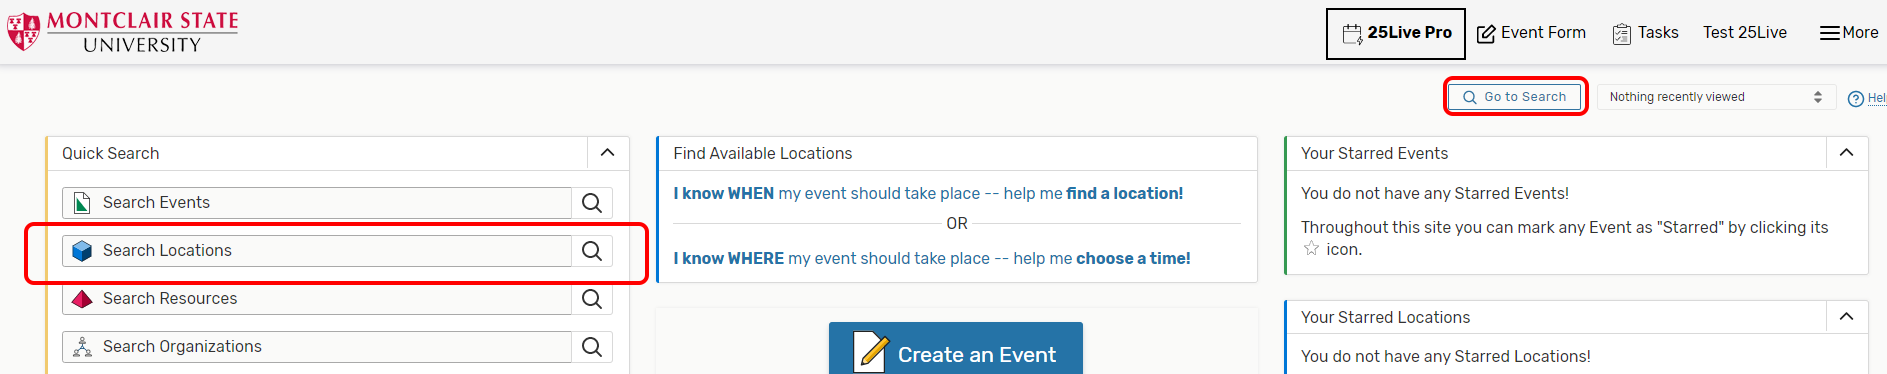 Search Locations text field in 25Live